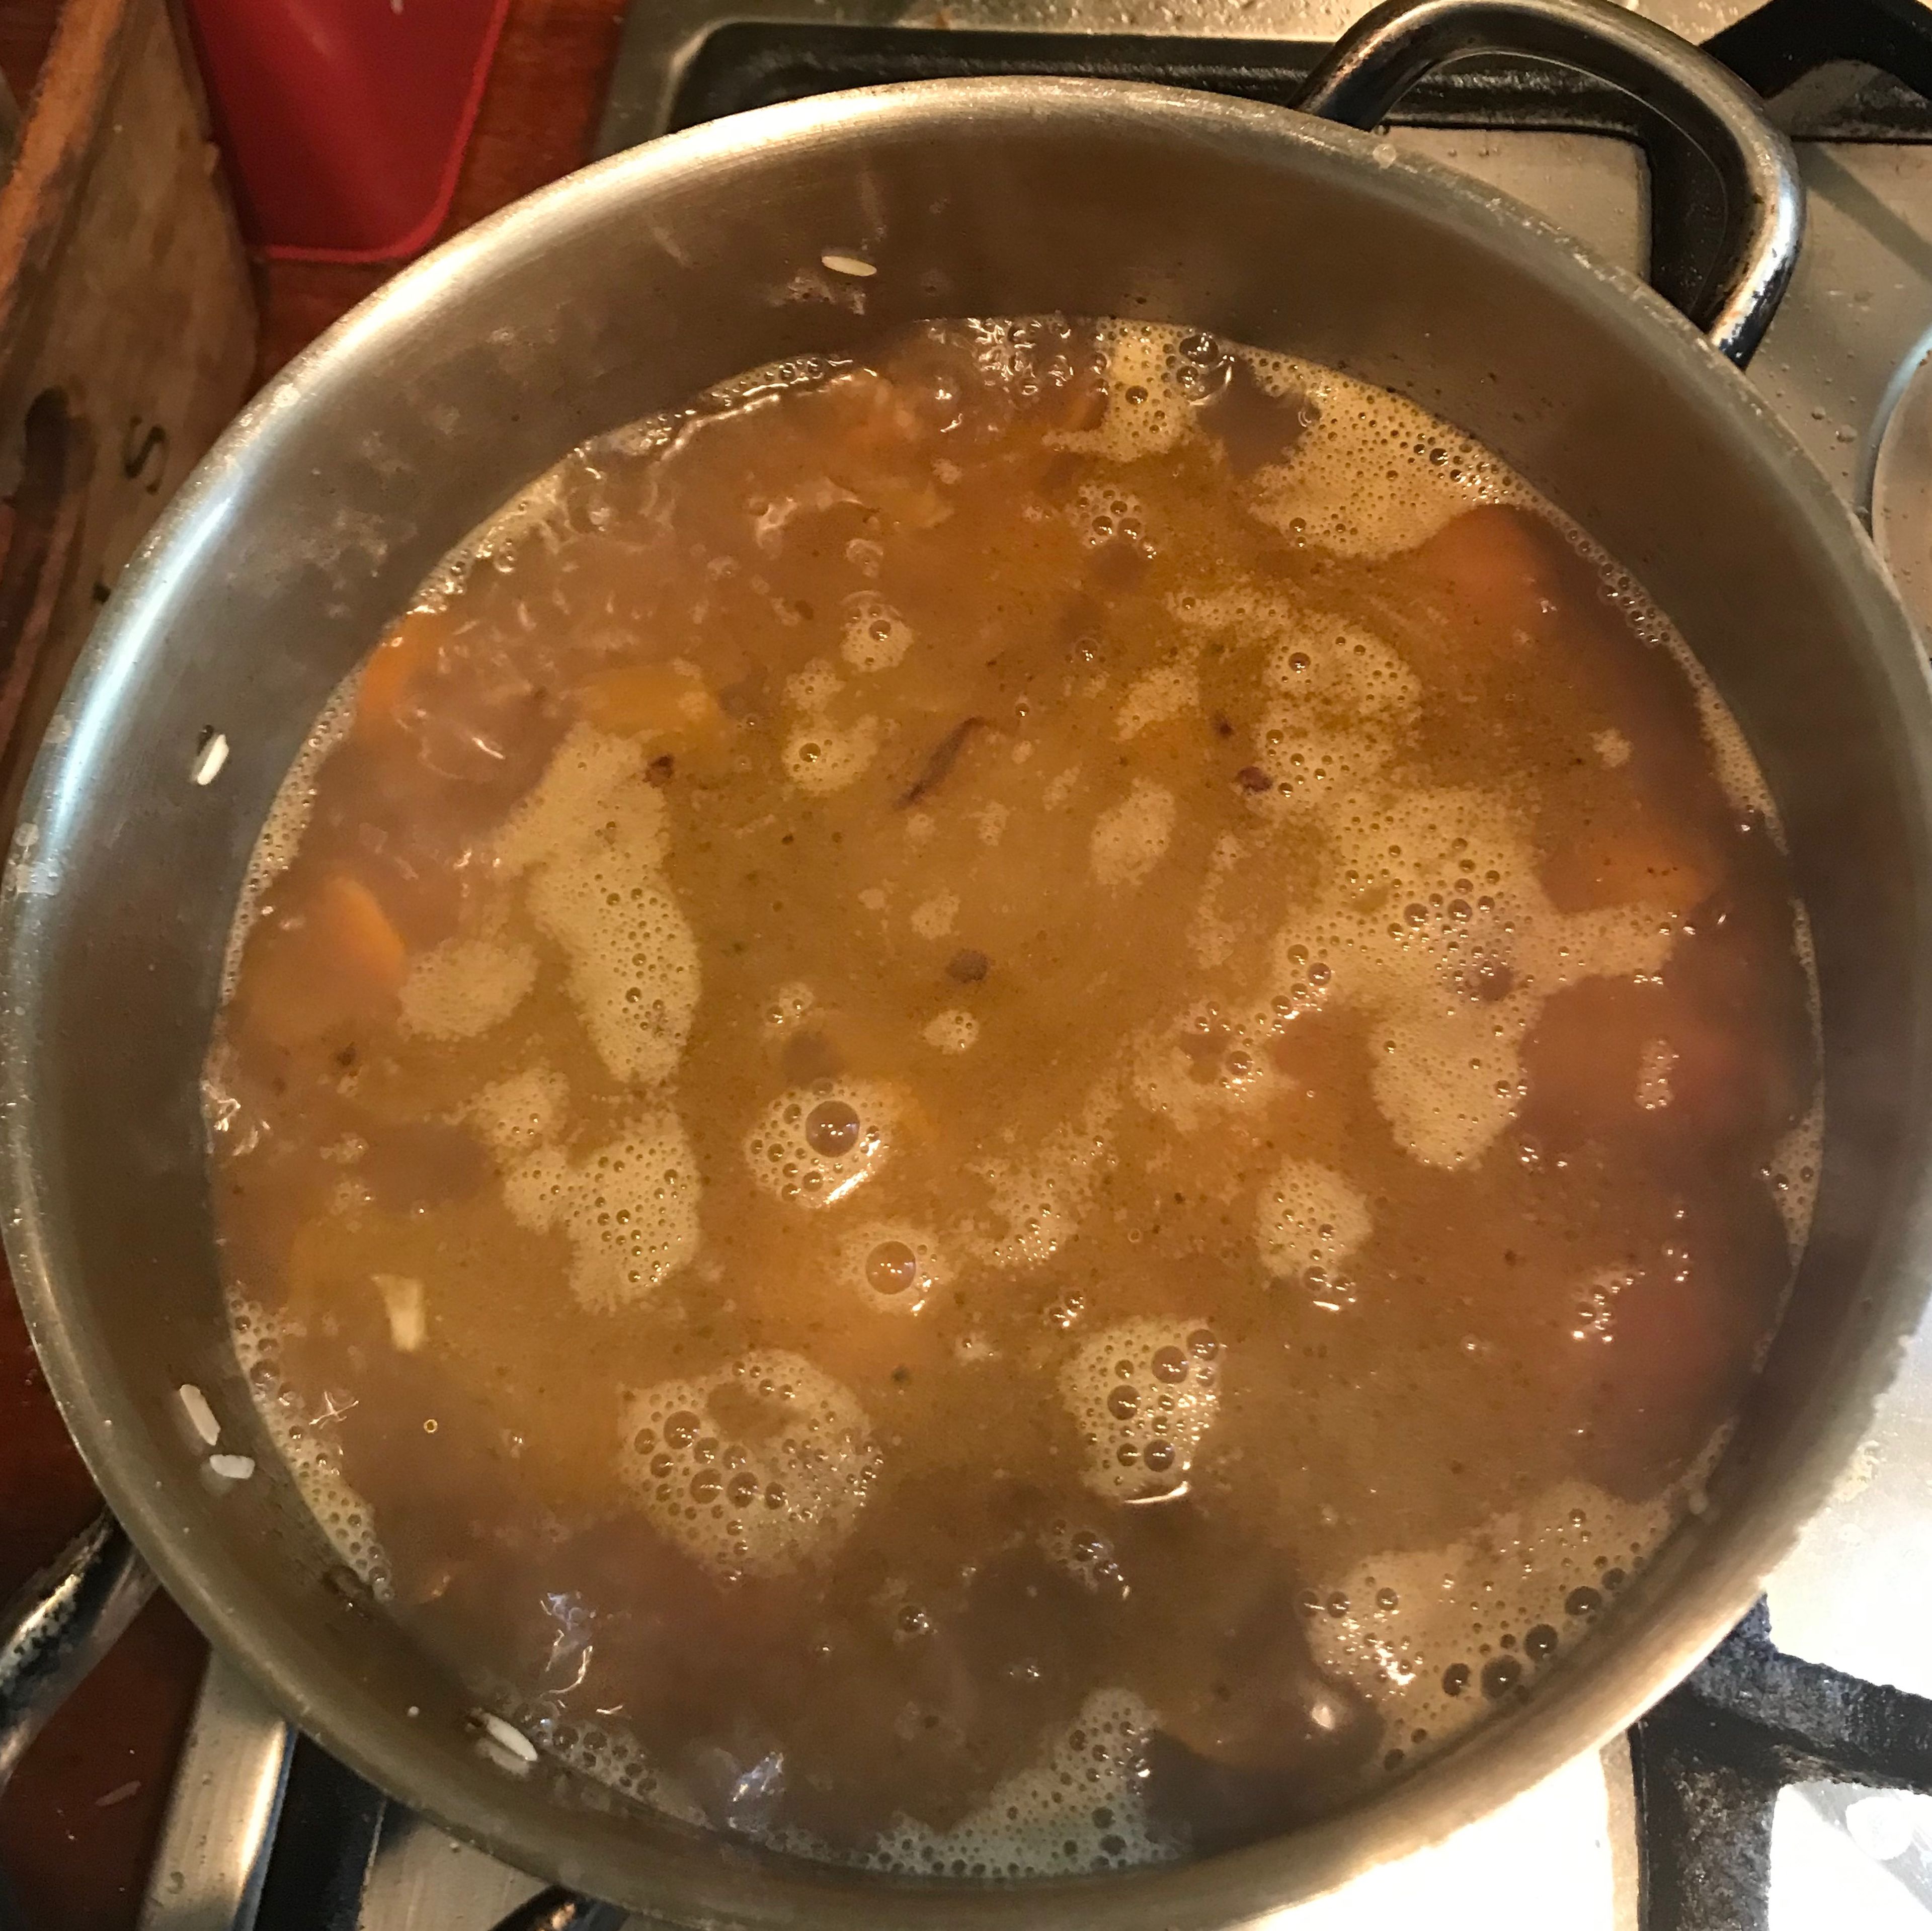 Add the stock, salt and the boiling water. Do not stir! Put a lid on and simmer in low heat for 15 minutes or until all the water is absorbed.